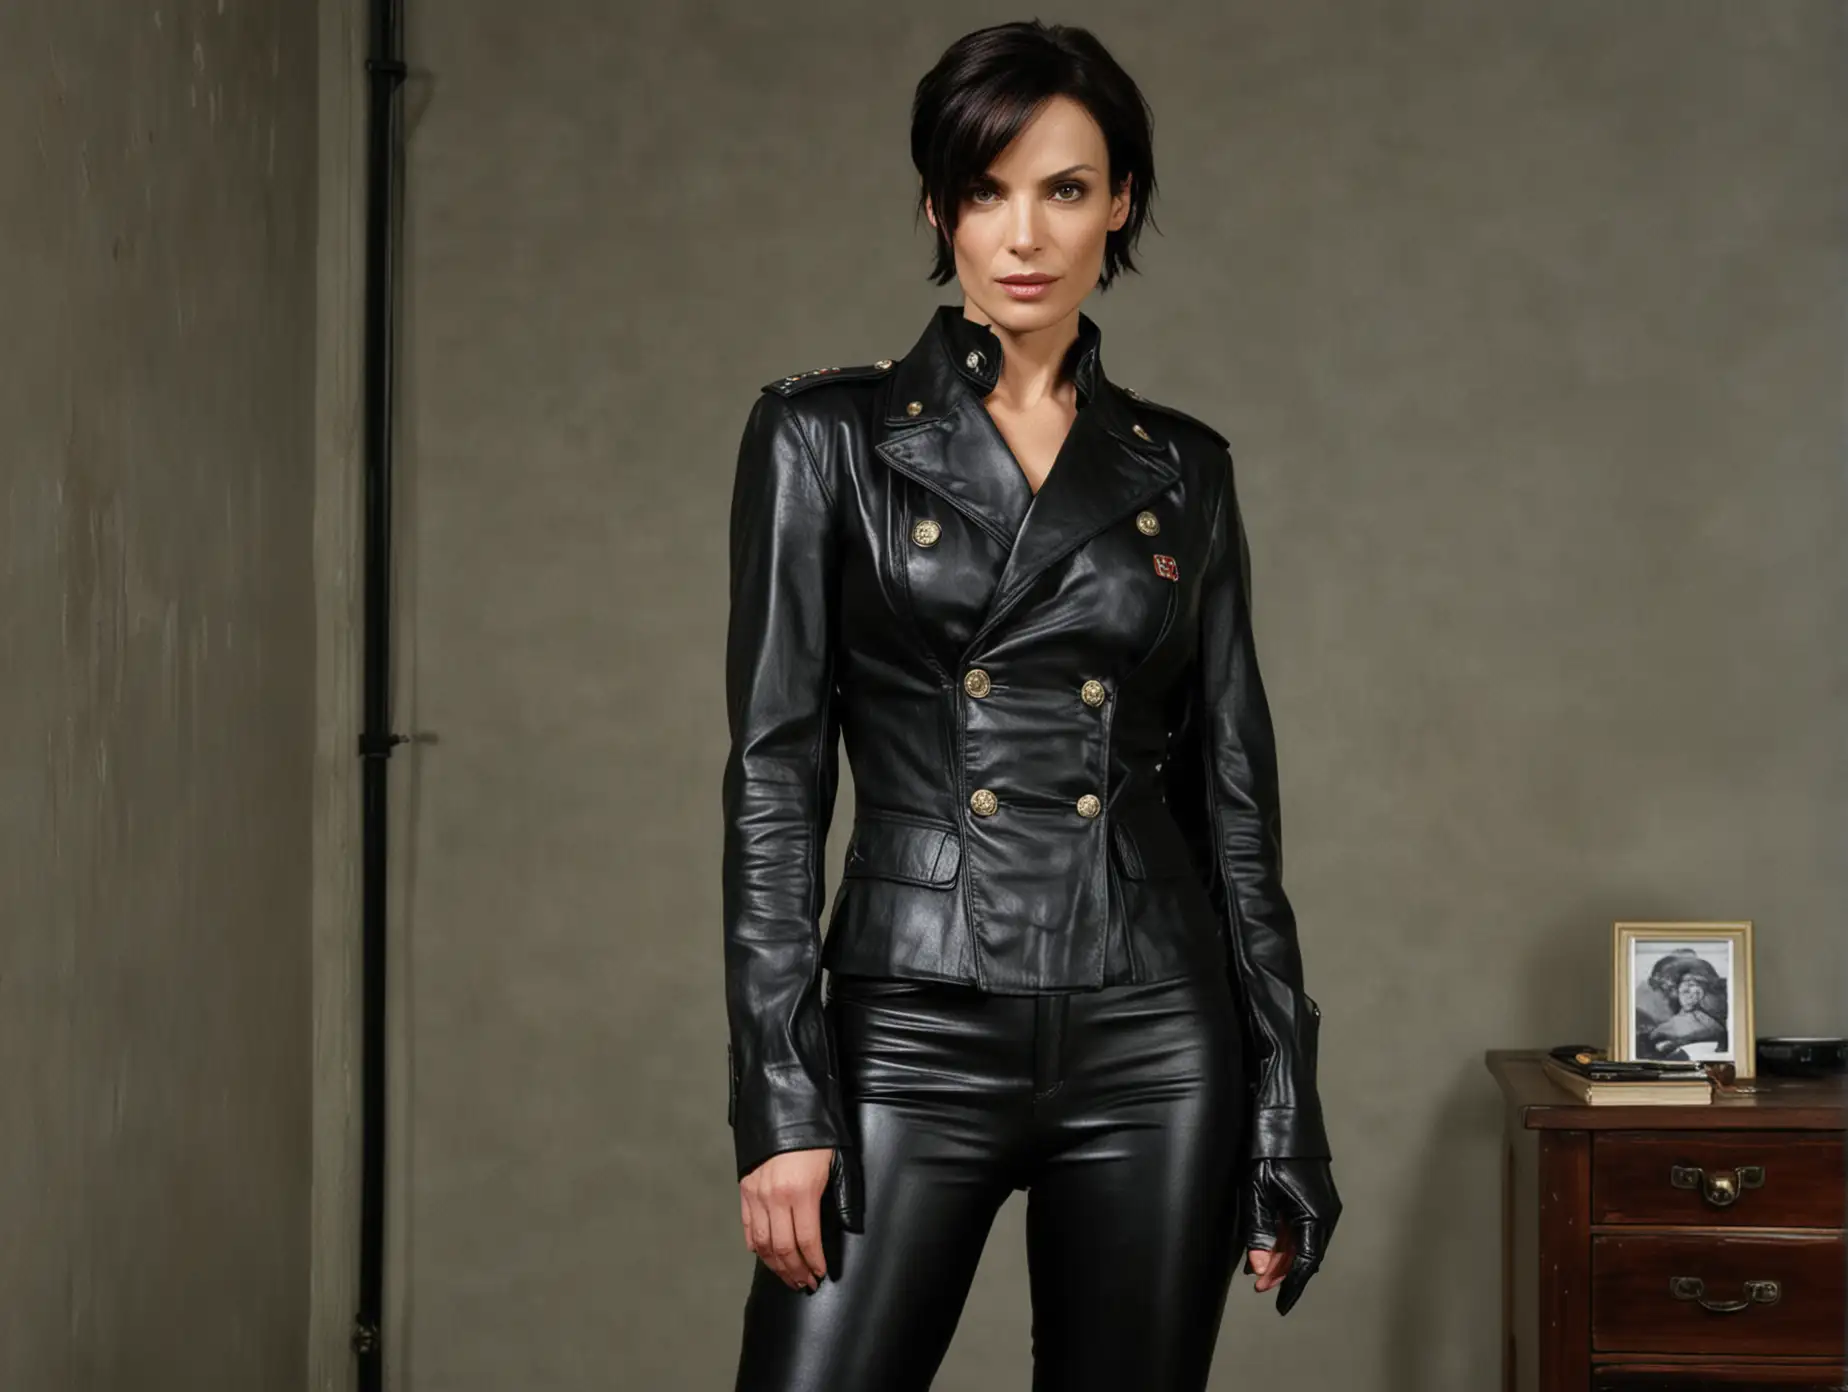 full length view of a very stern looking FAMKE JANSSEN with short hair as a MILITARY kommandant , very busty with short hair wearing leather military uniform, black leather blazer leather gloves BLACK LEATHER pants STANDING in her kommandant's offiice wearing knee length leather boots